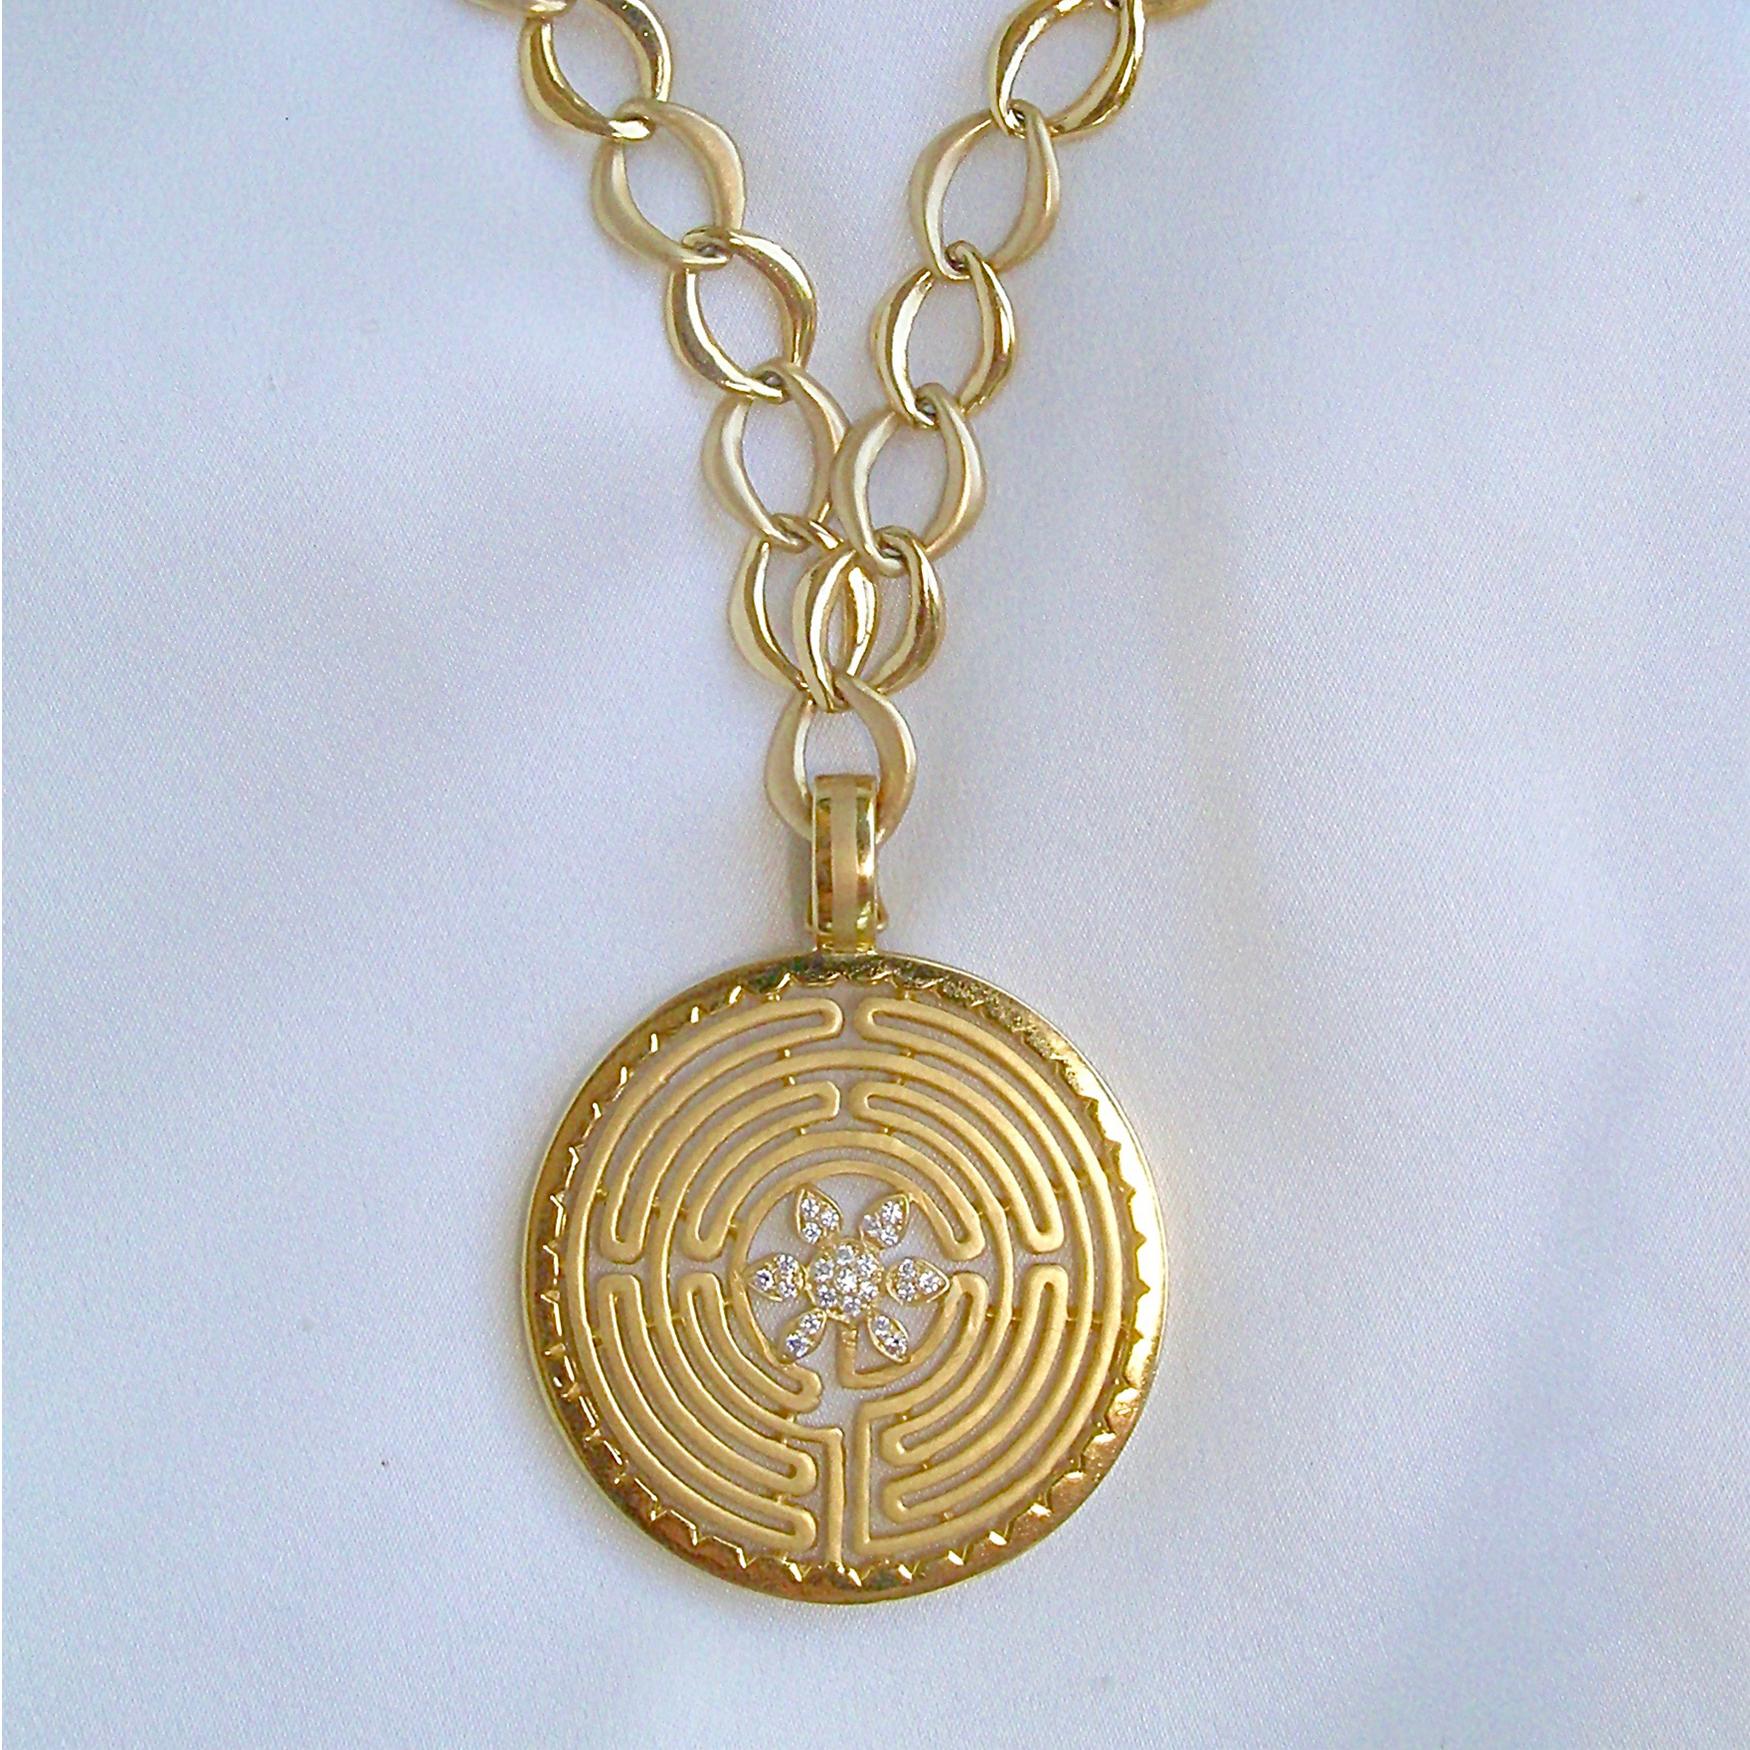 Have you ever walked a Labyrinth?  It is the symbol of life's journey and the round shape and integral spiritual characteristics make this piece of jewelry a meaningful, soulful work of art.  You can feel the energy of this piece of jewelry.  My